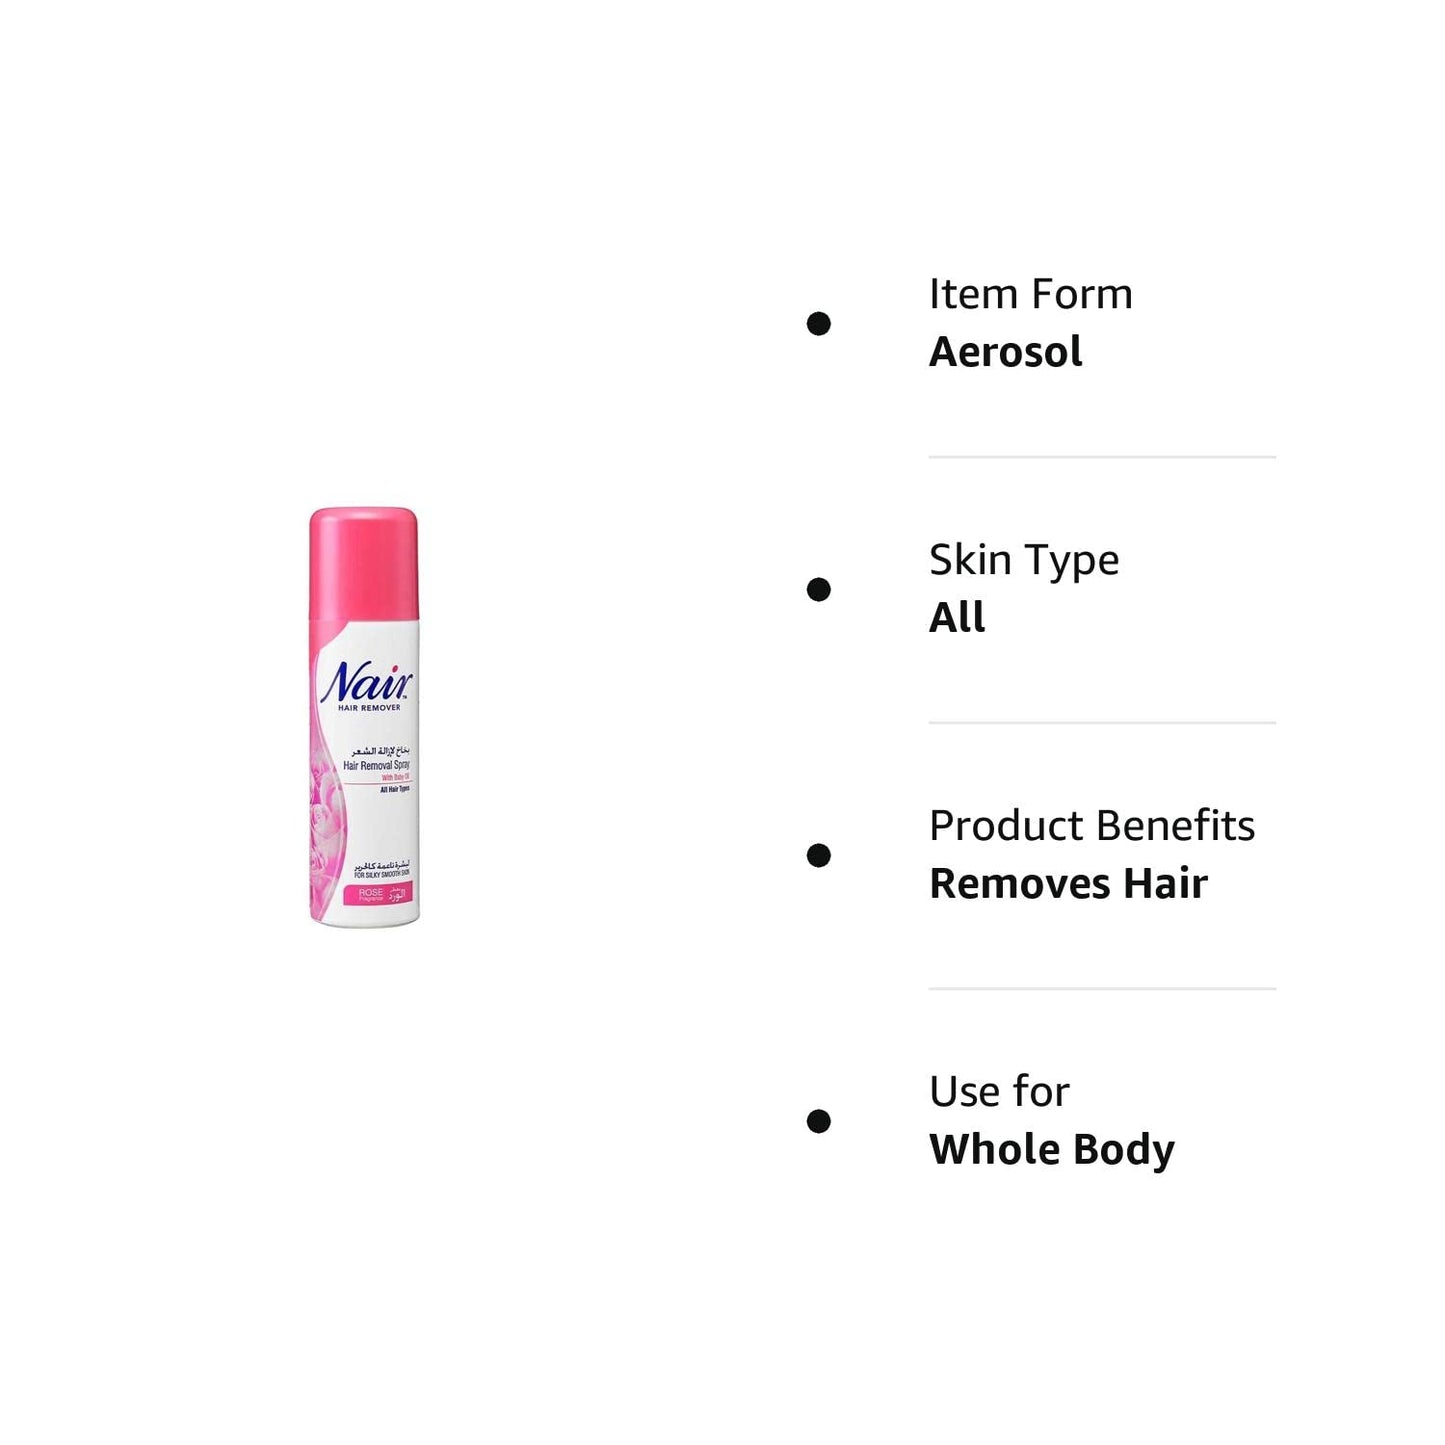 Nair Hair Removal Spray (imported) Rose